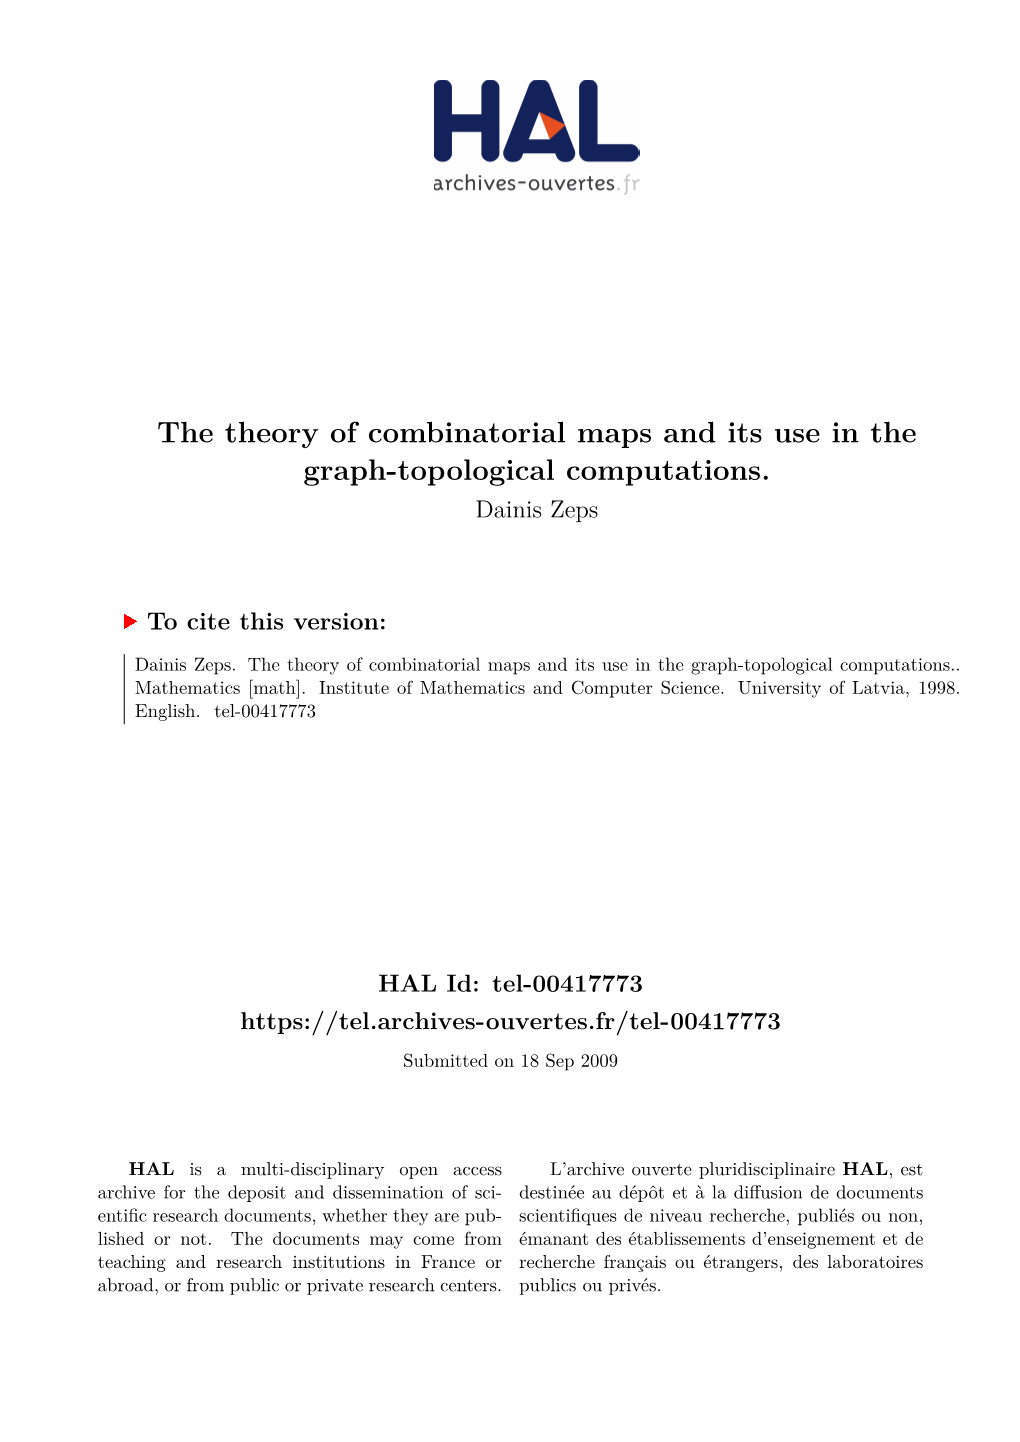 The Theory of Combinatorial Maps and Its Use in the Graph-Topological Computations